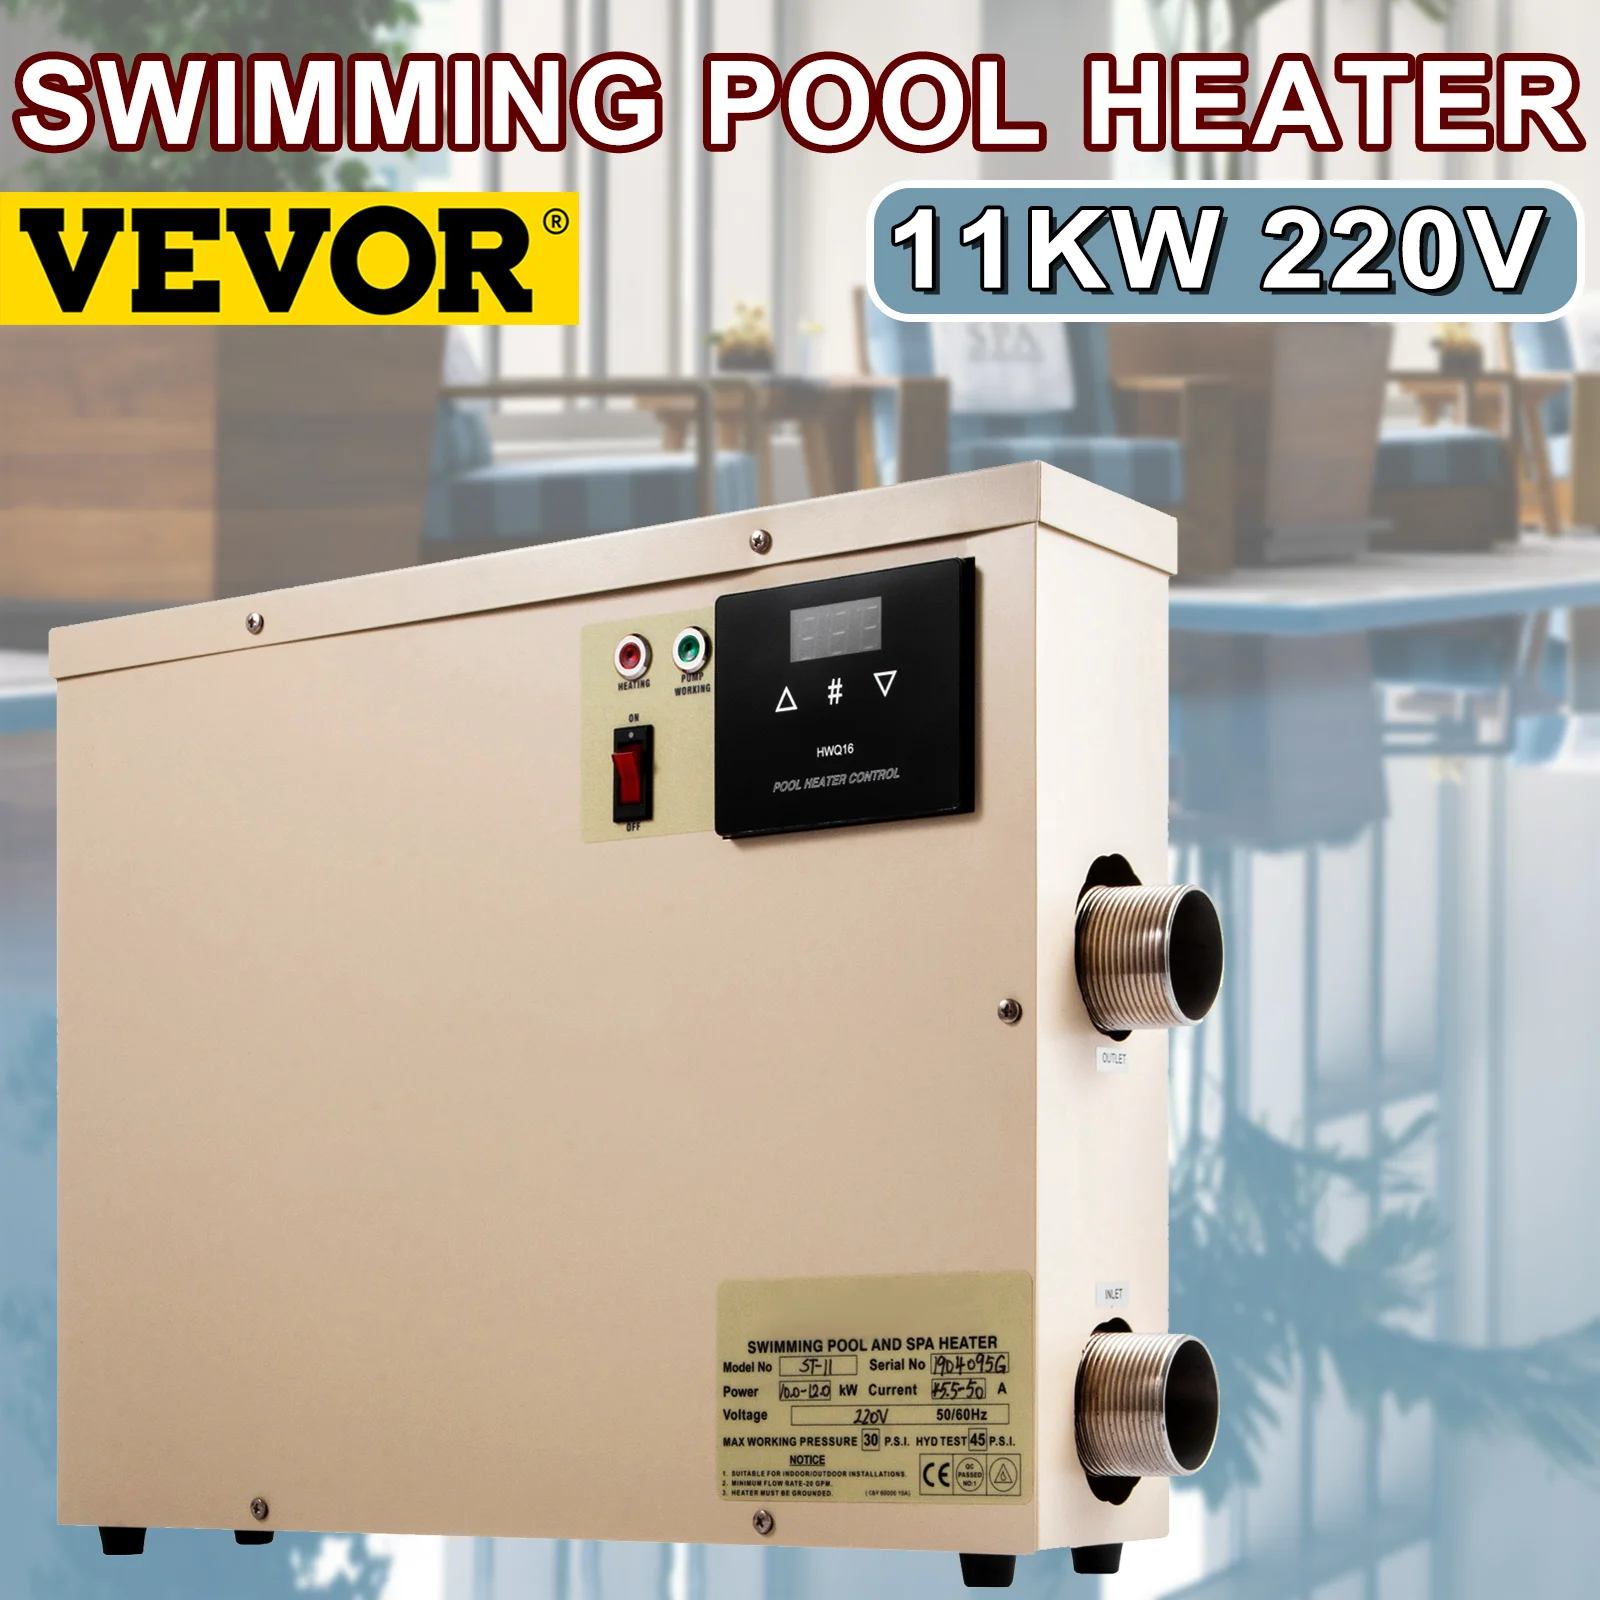 

VEVOR 11KW 220V Electric Digital Water Heater Thermostat Swimming Pool Heater SPA Hot Tub Bath Heating Adjustable Temperature